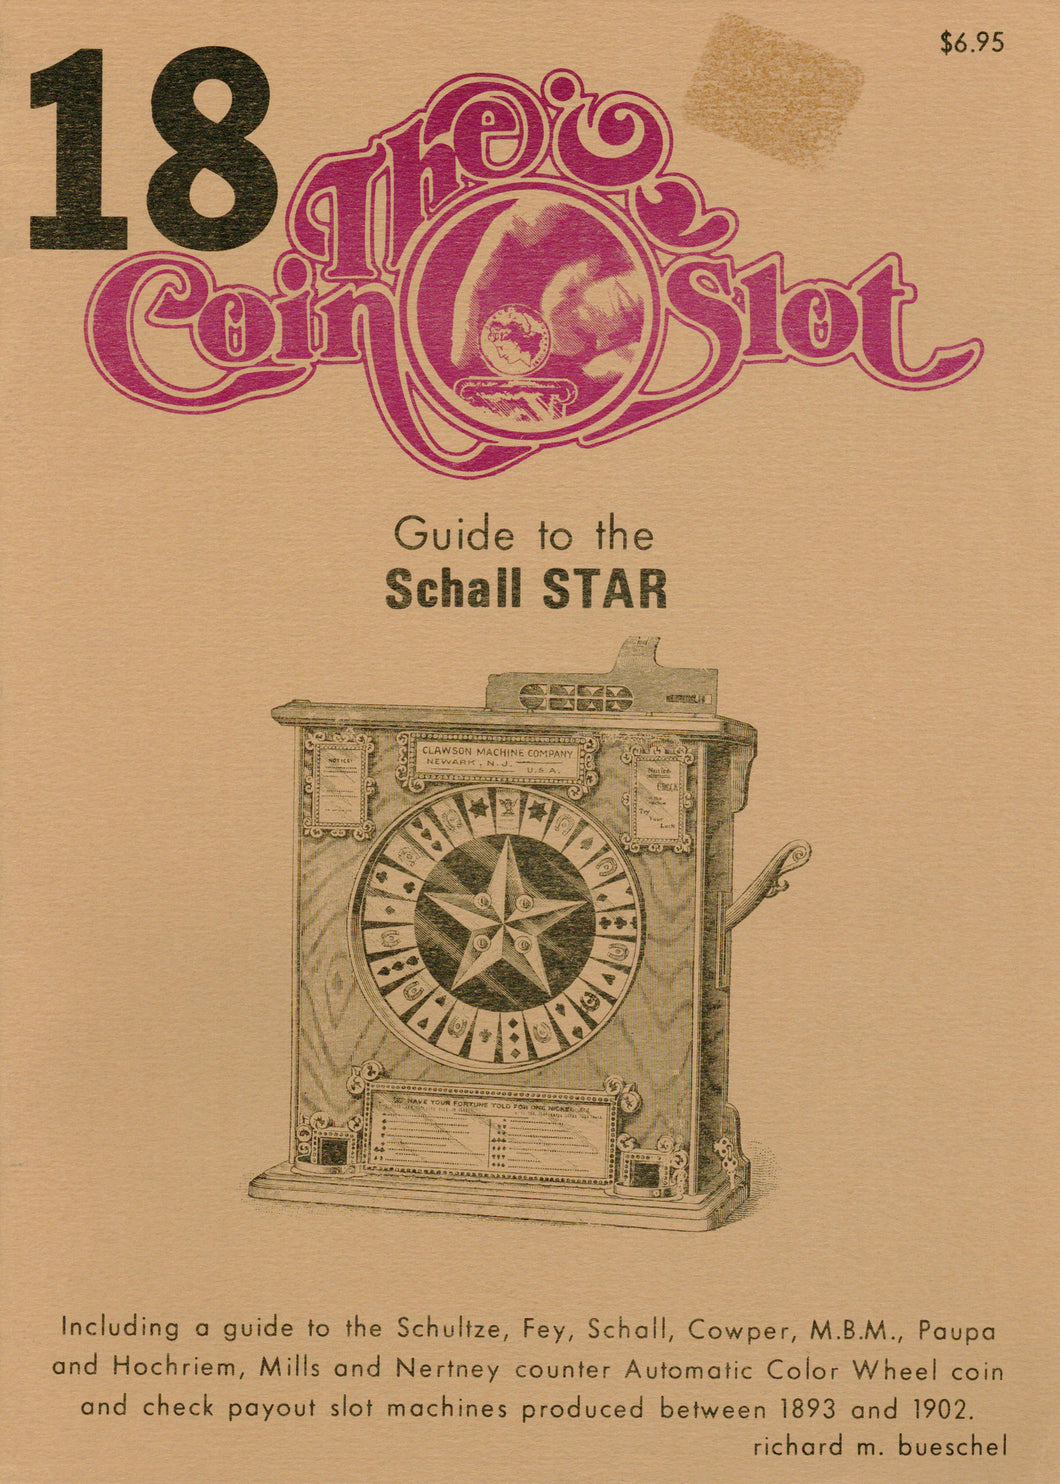 Coin Slot #18. Guide to the Schall Star